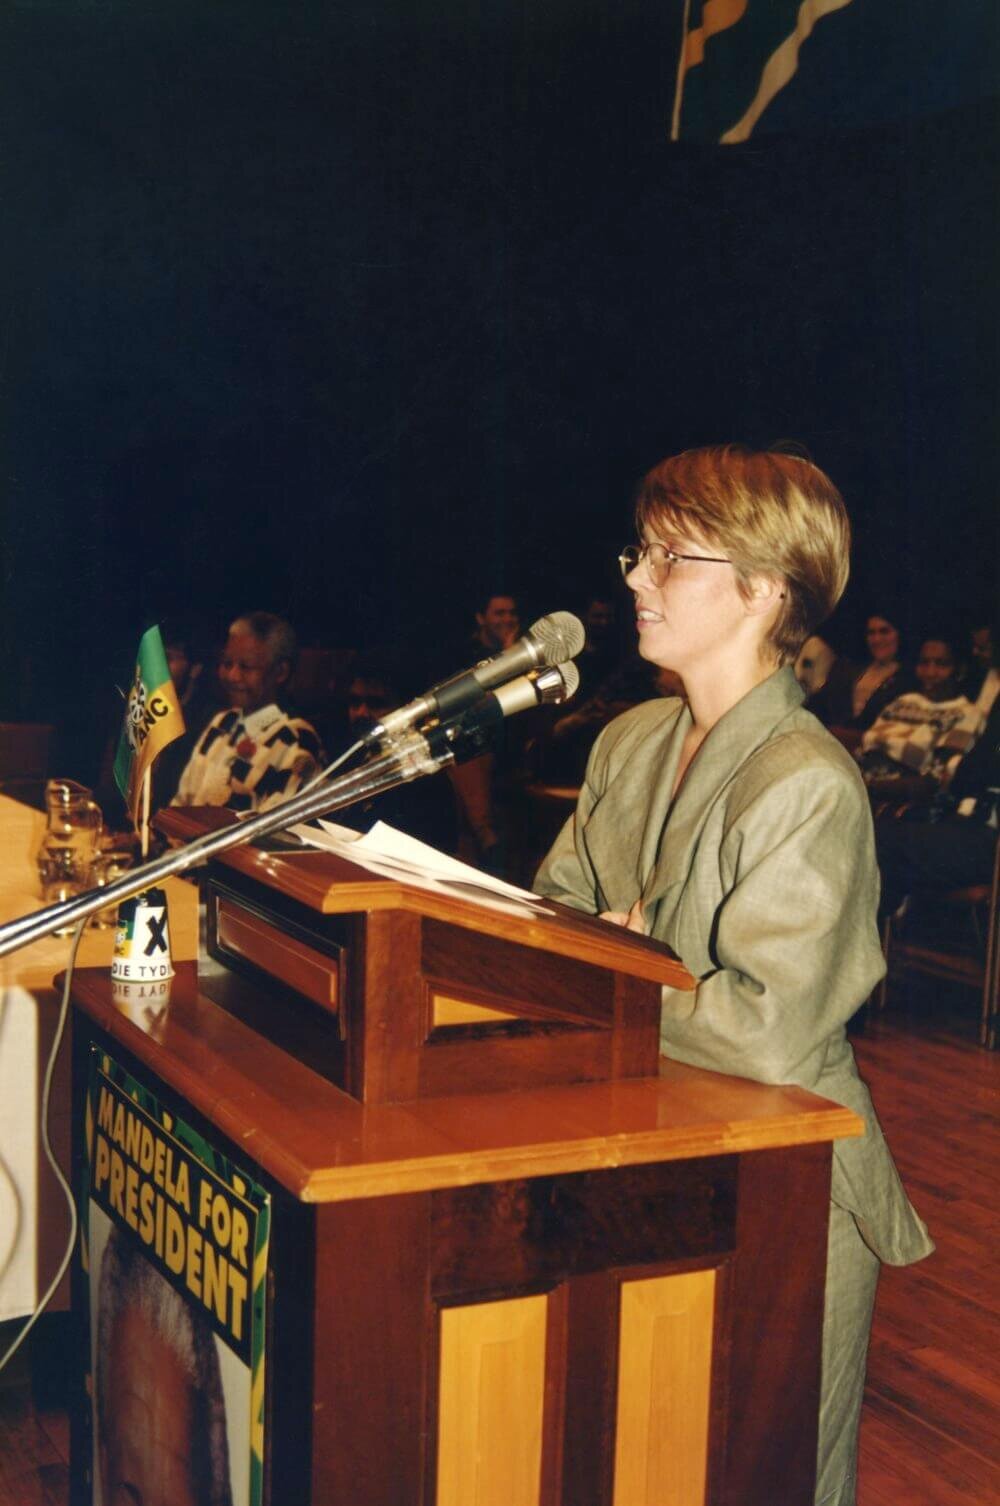 Speaking at a town hall meeting